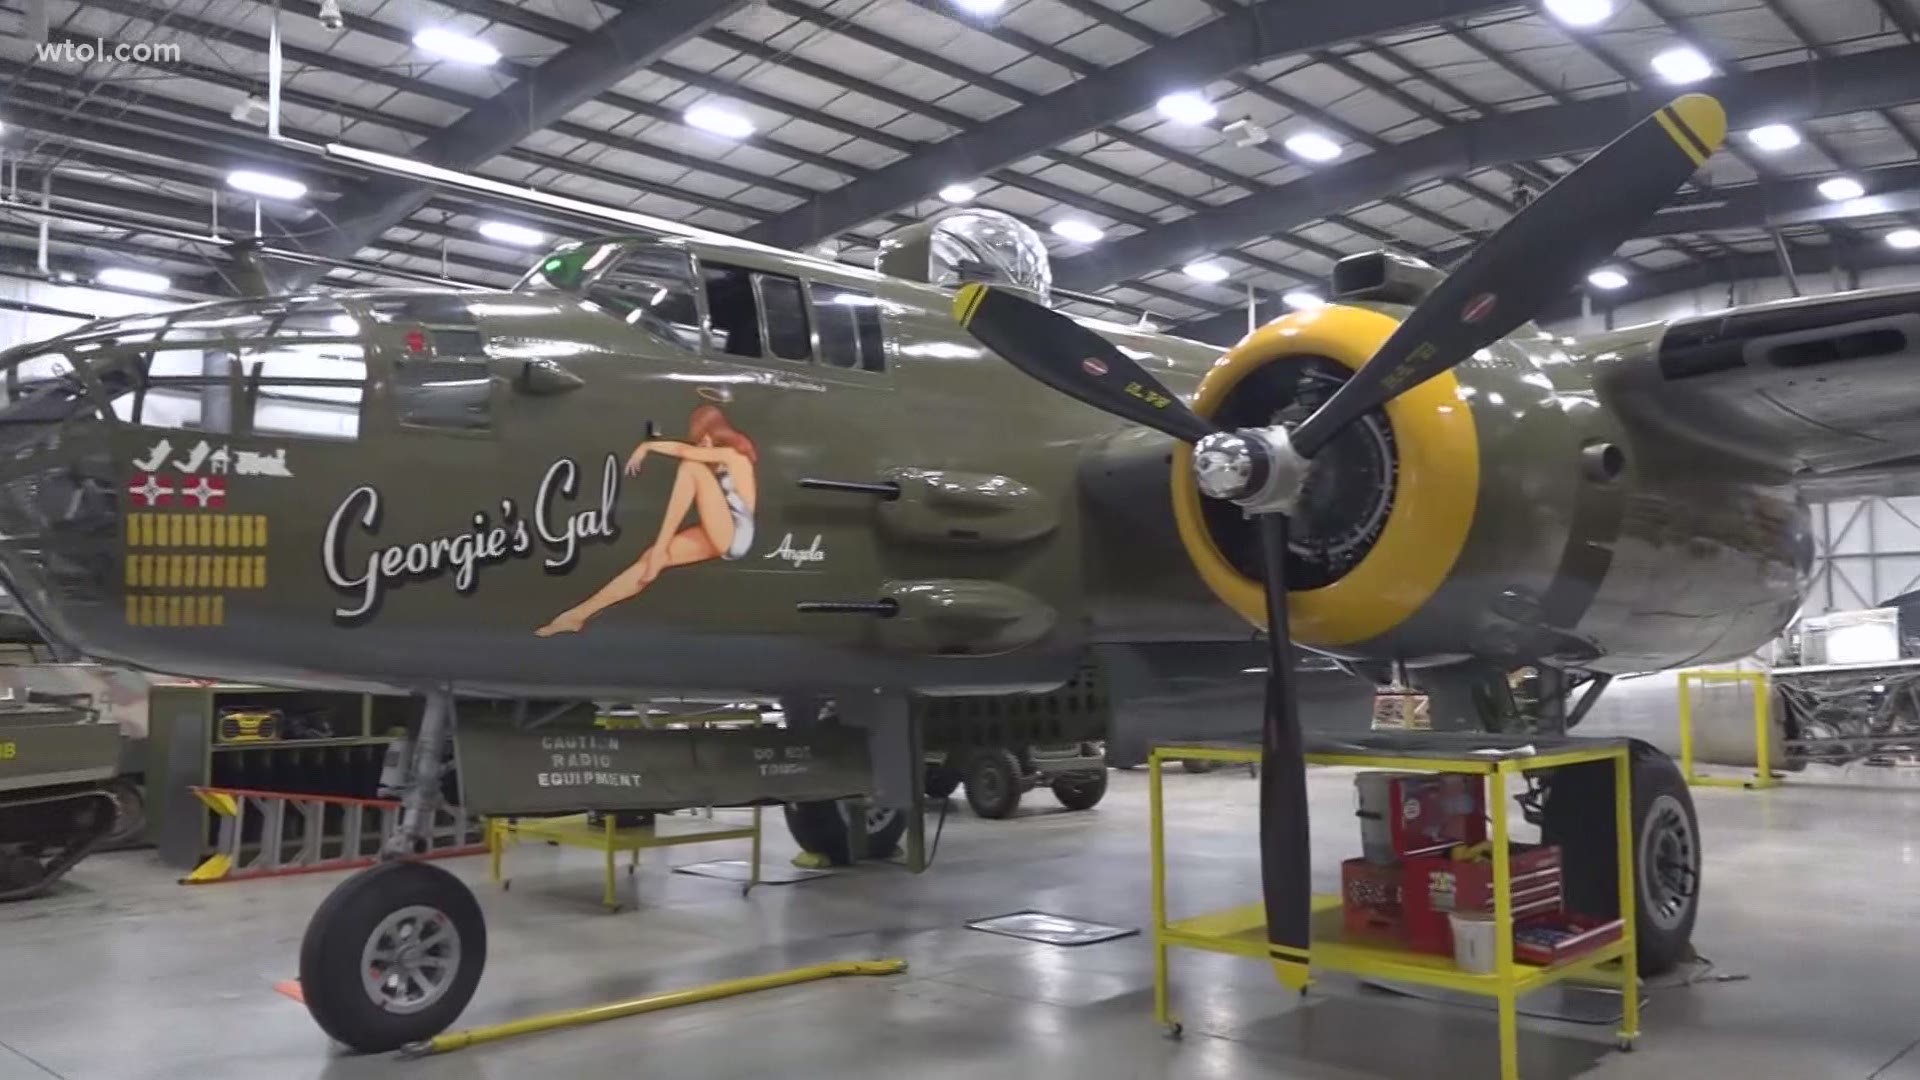 The working museum showcases planes, cars, military vehicles and is home to a restored diner from the 1940's.